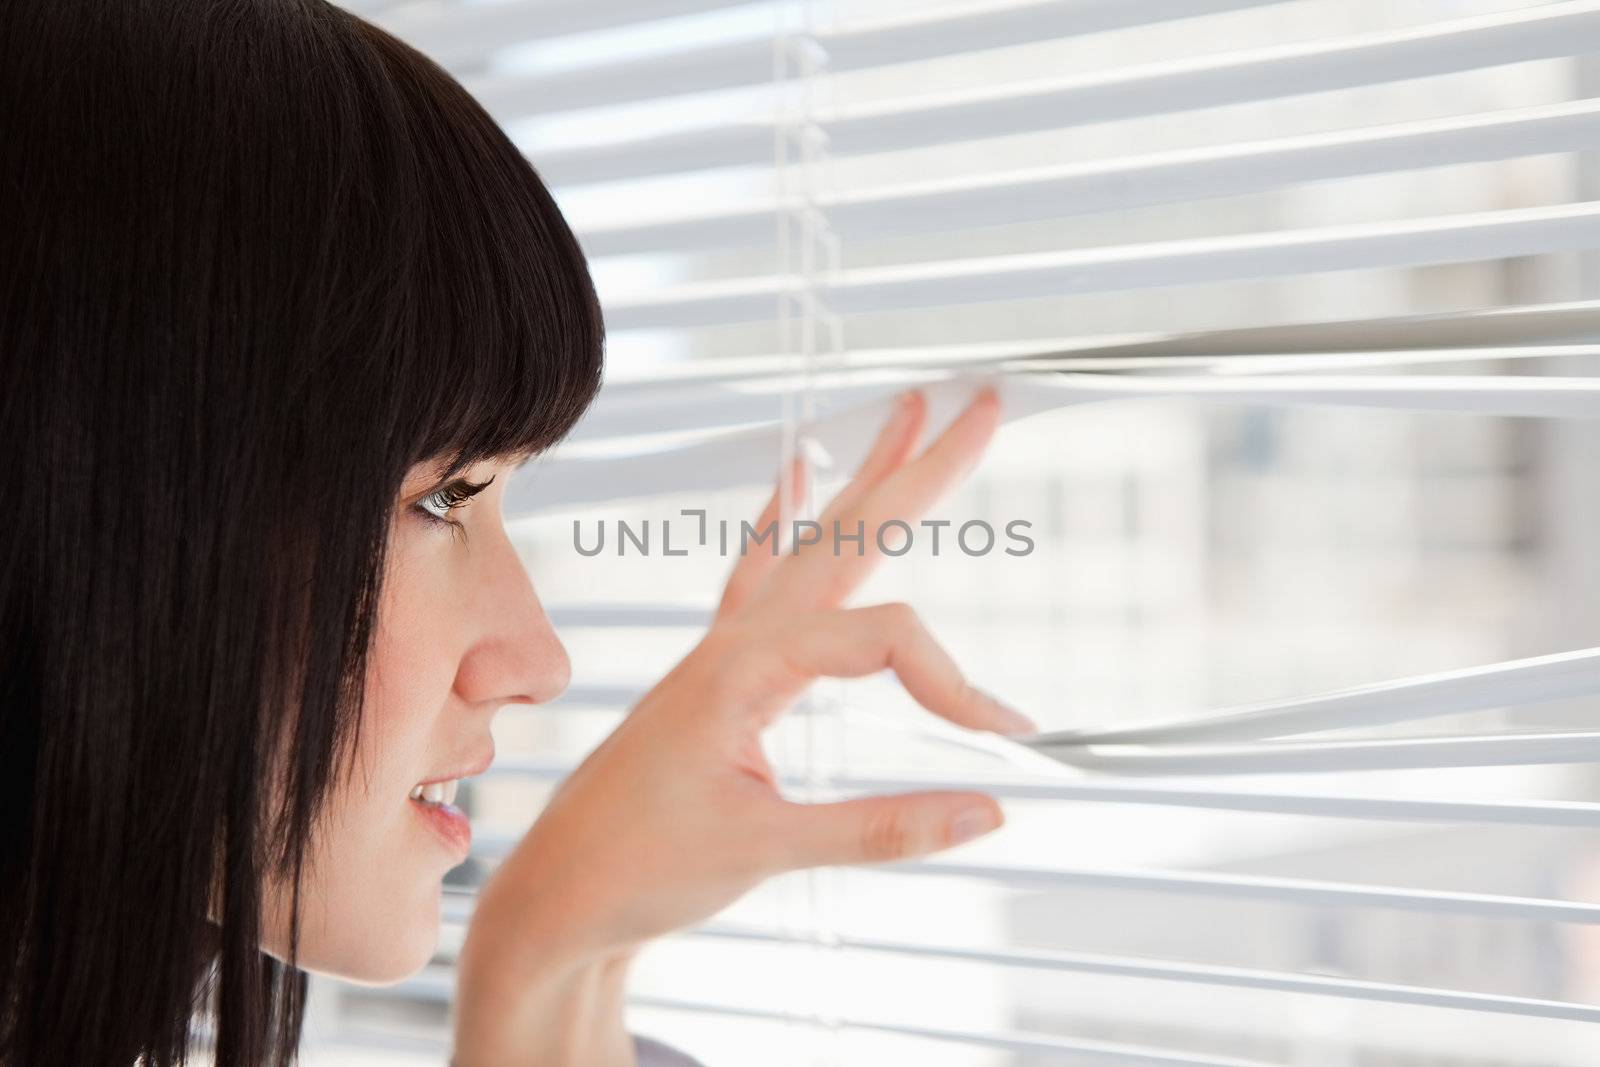 A woman at the window as she looks out through the blinds